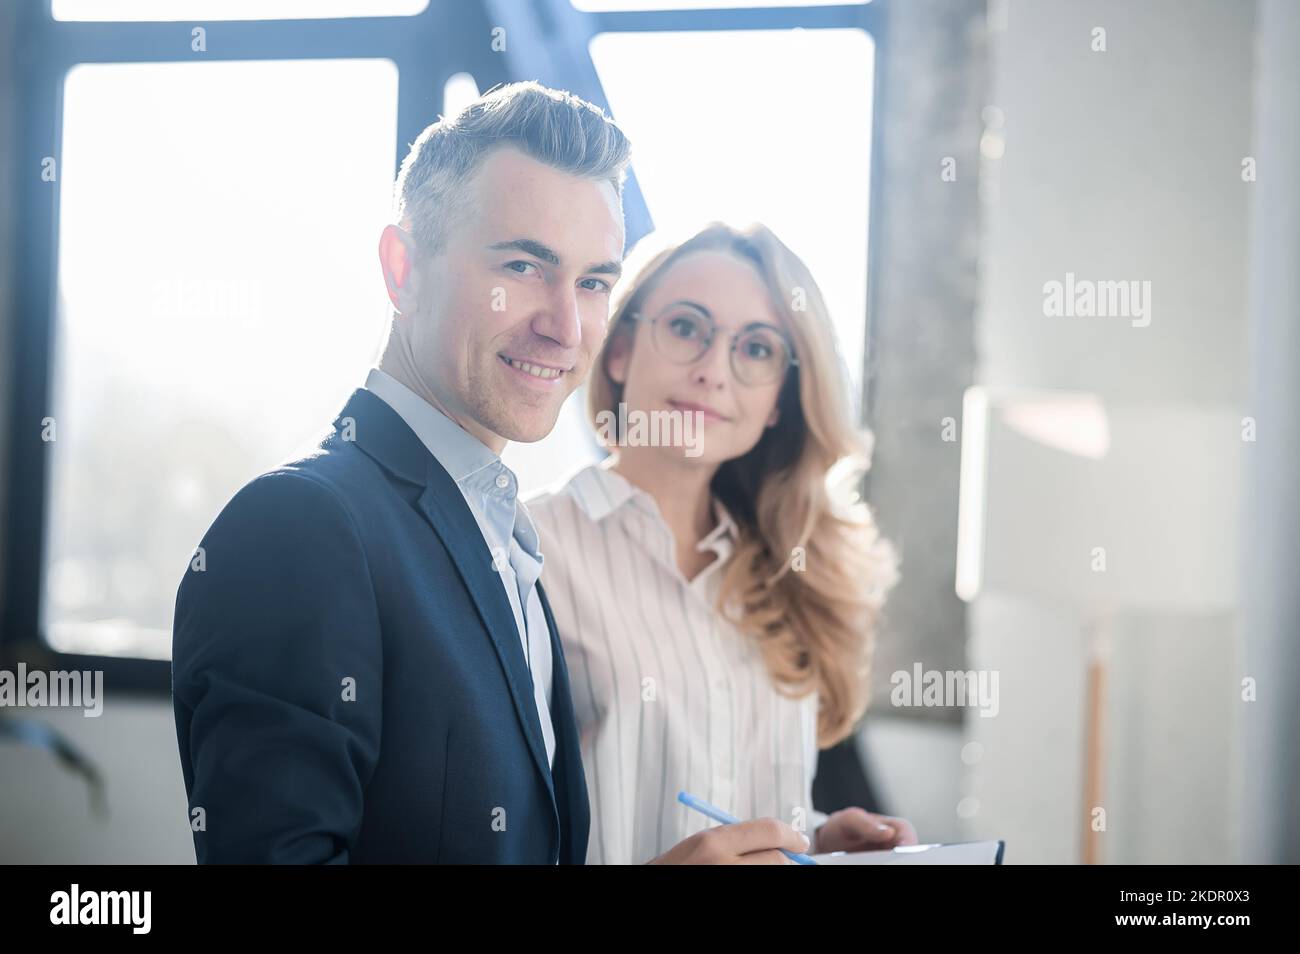 Elegant man and woman working together in the office Stock Photo